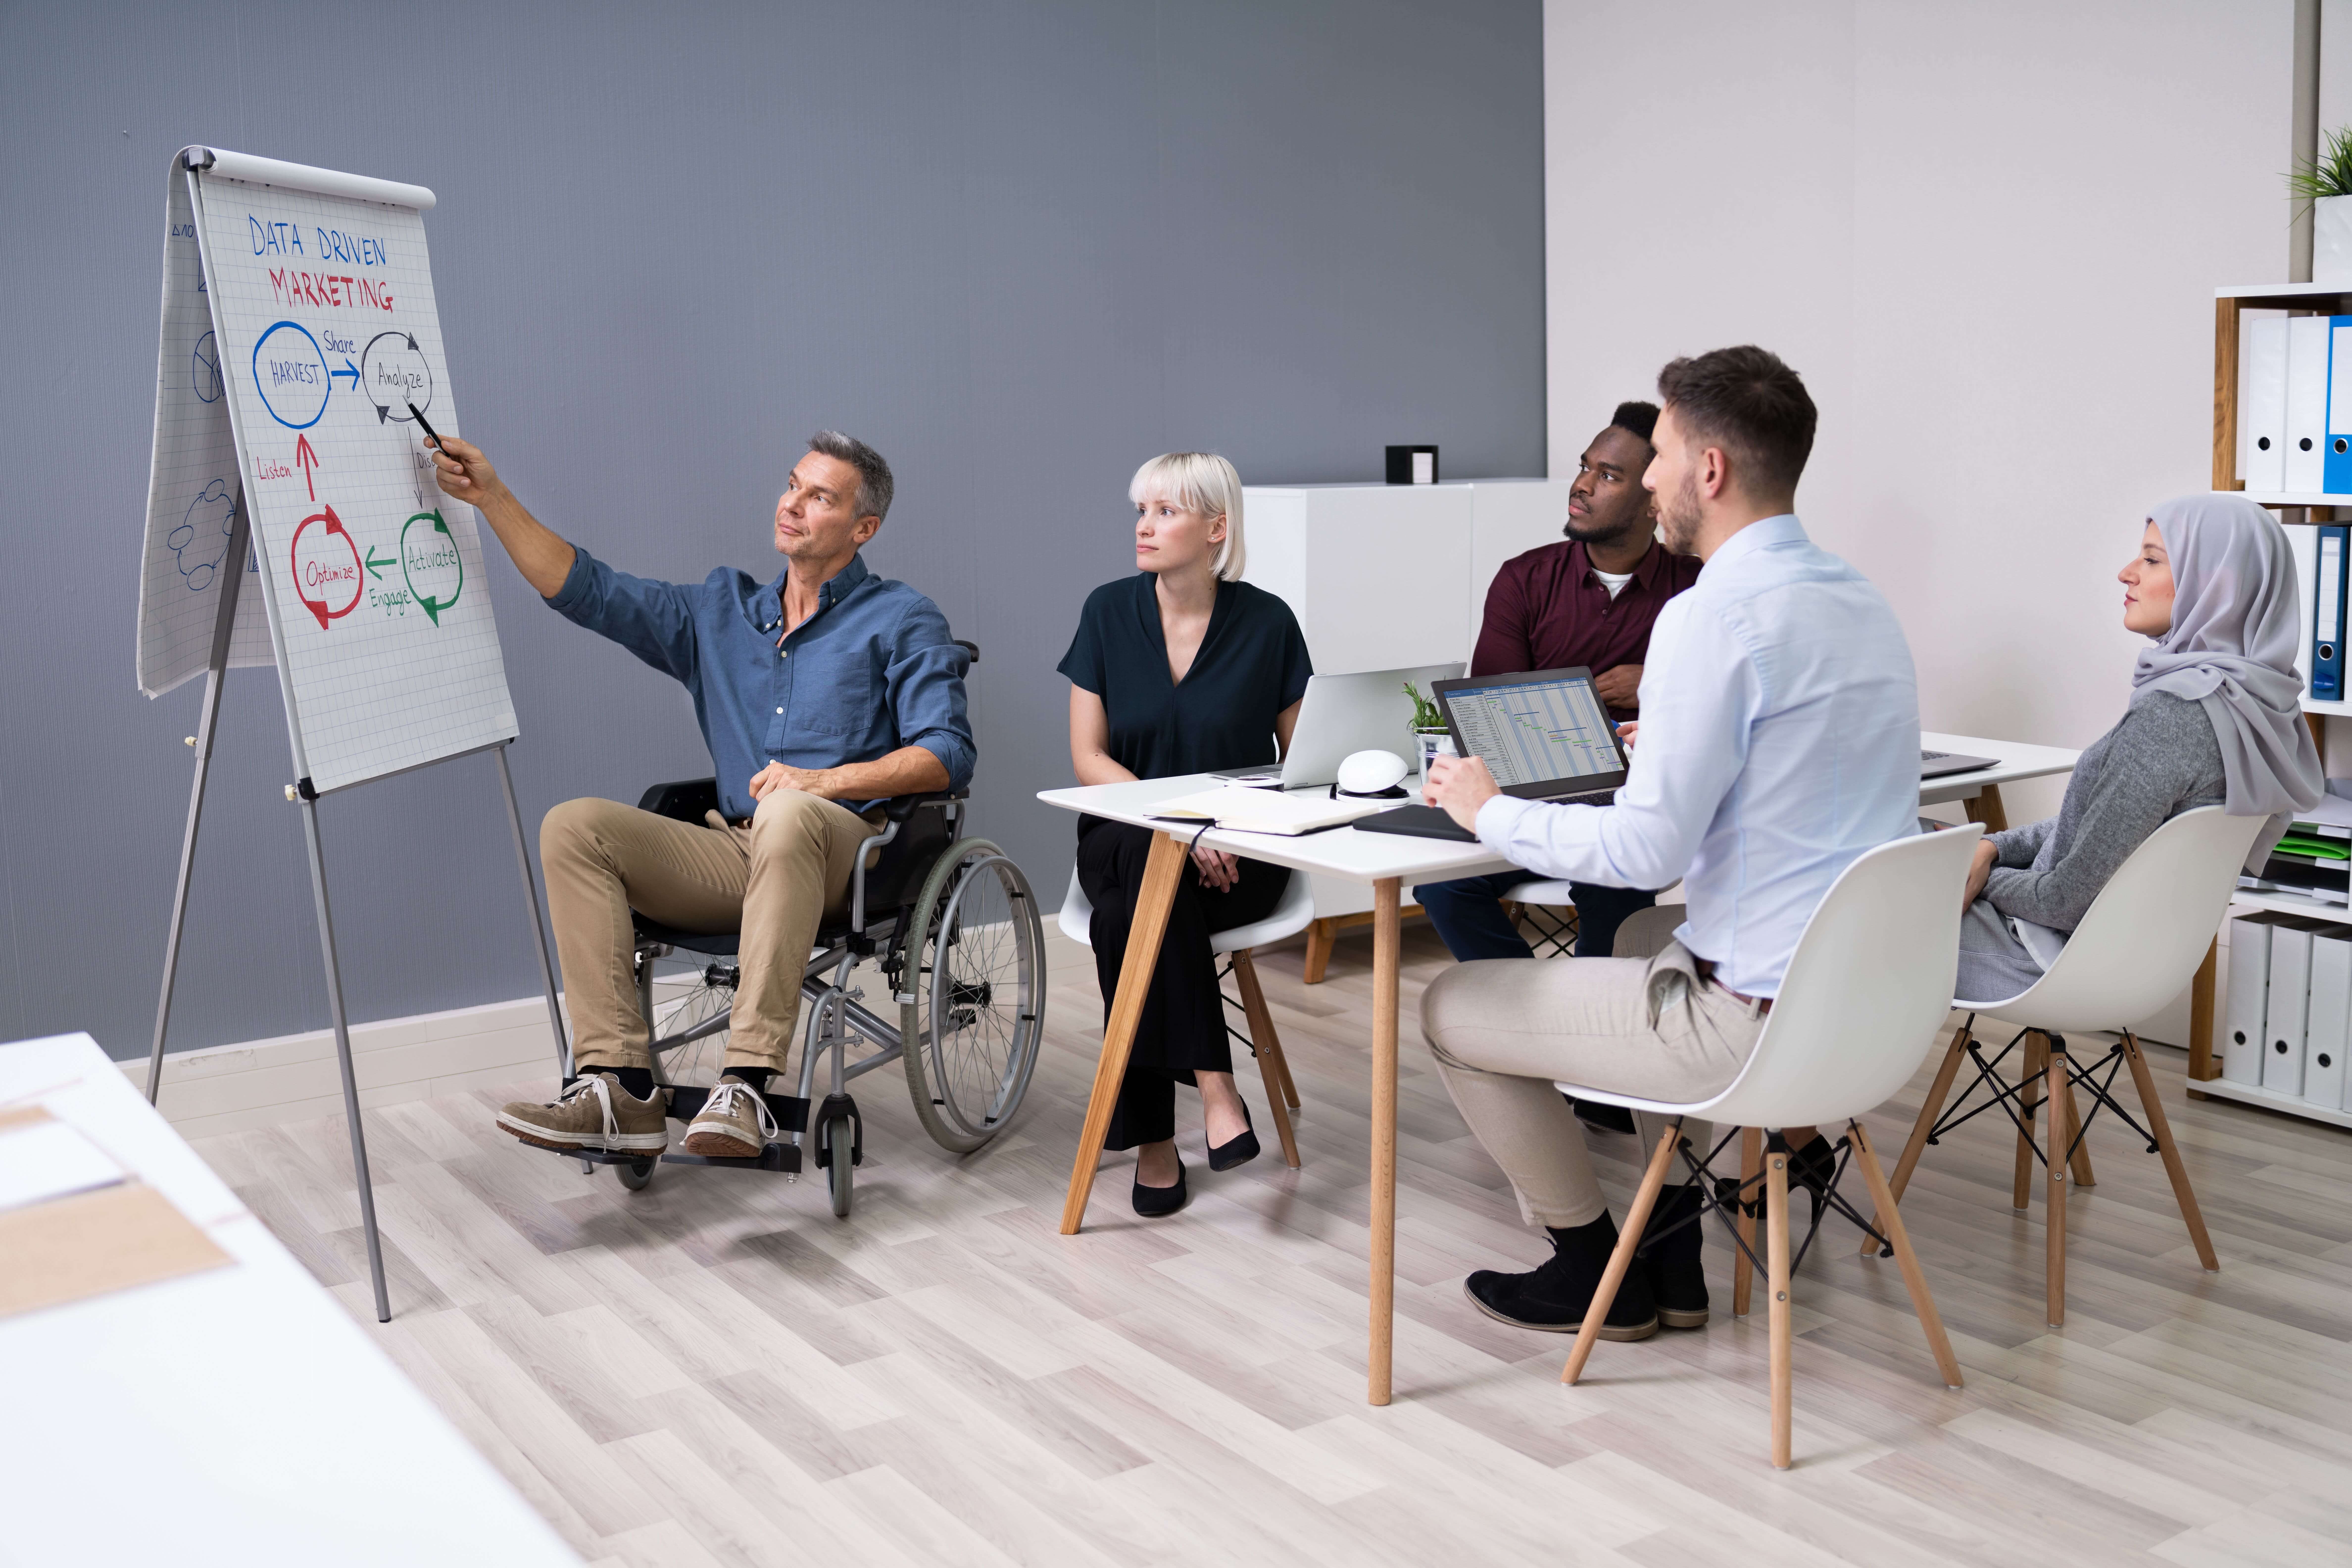 A group meeting with 4 diverse people sat at a table. A man is sat in a wheelchair, presenting to them using a flipchart.